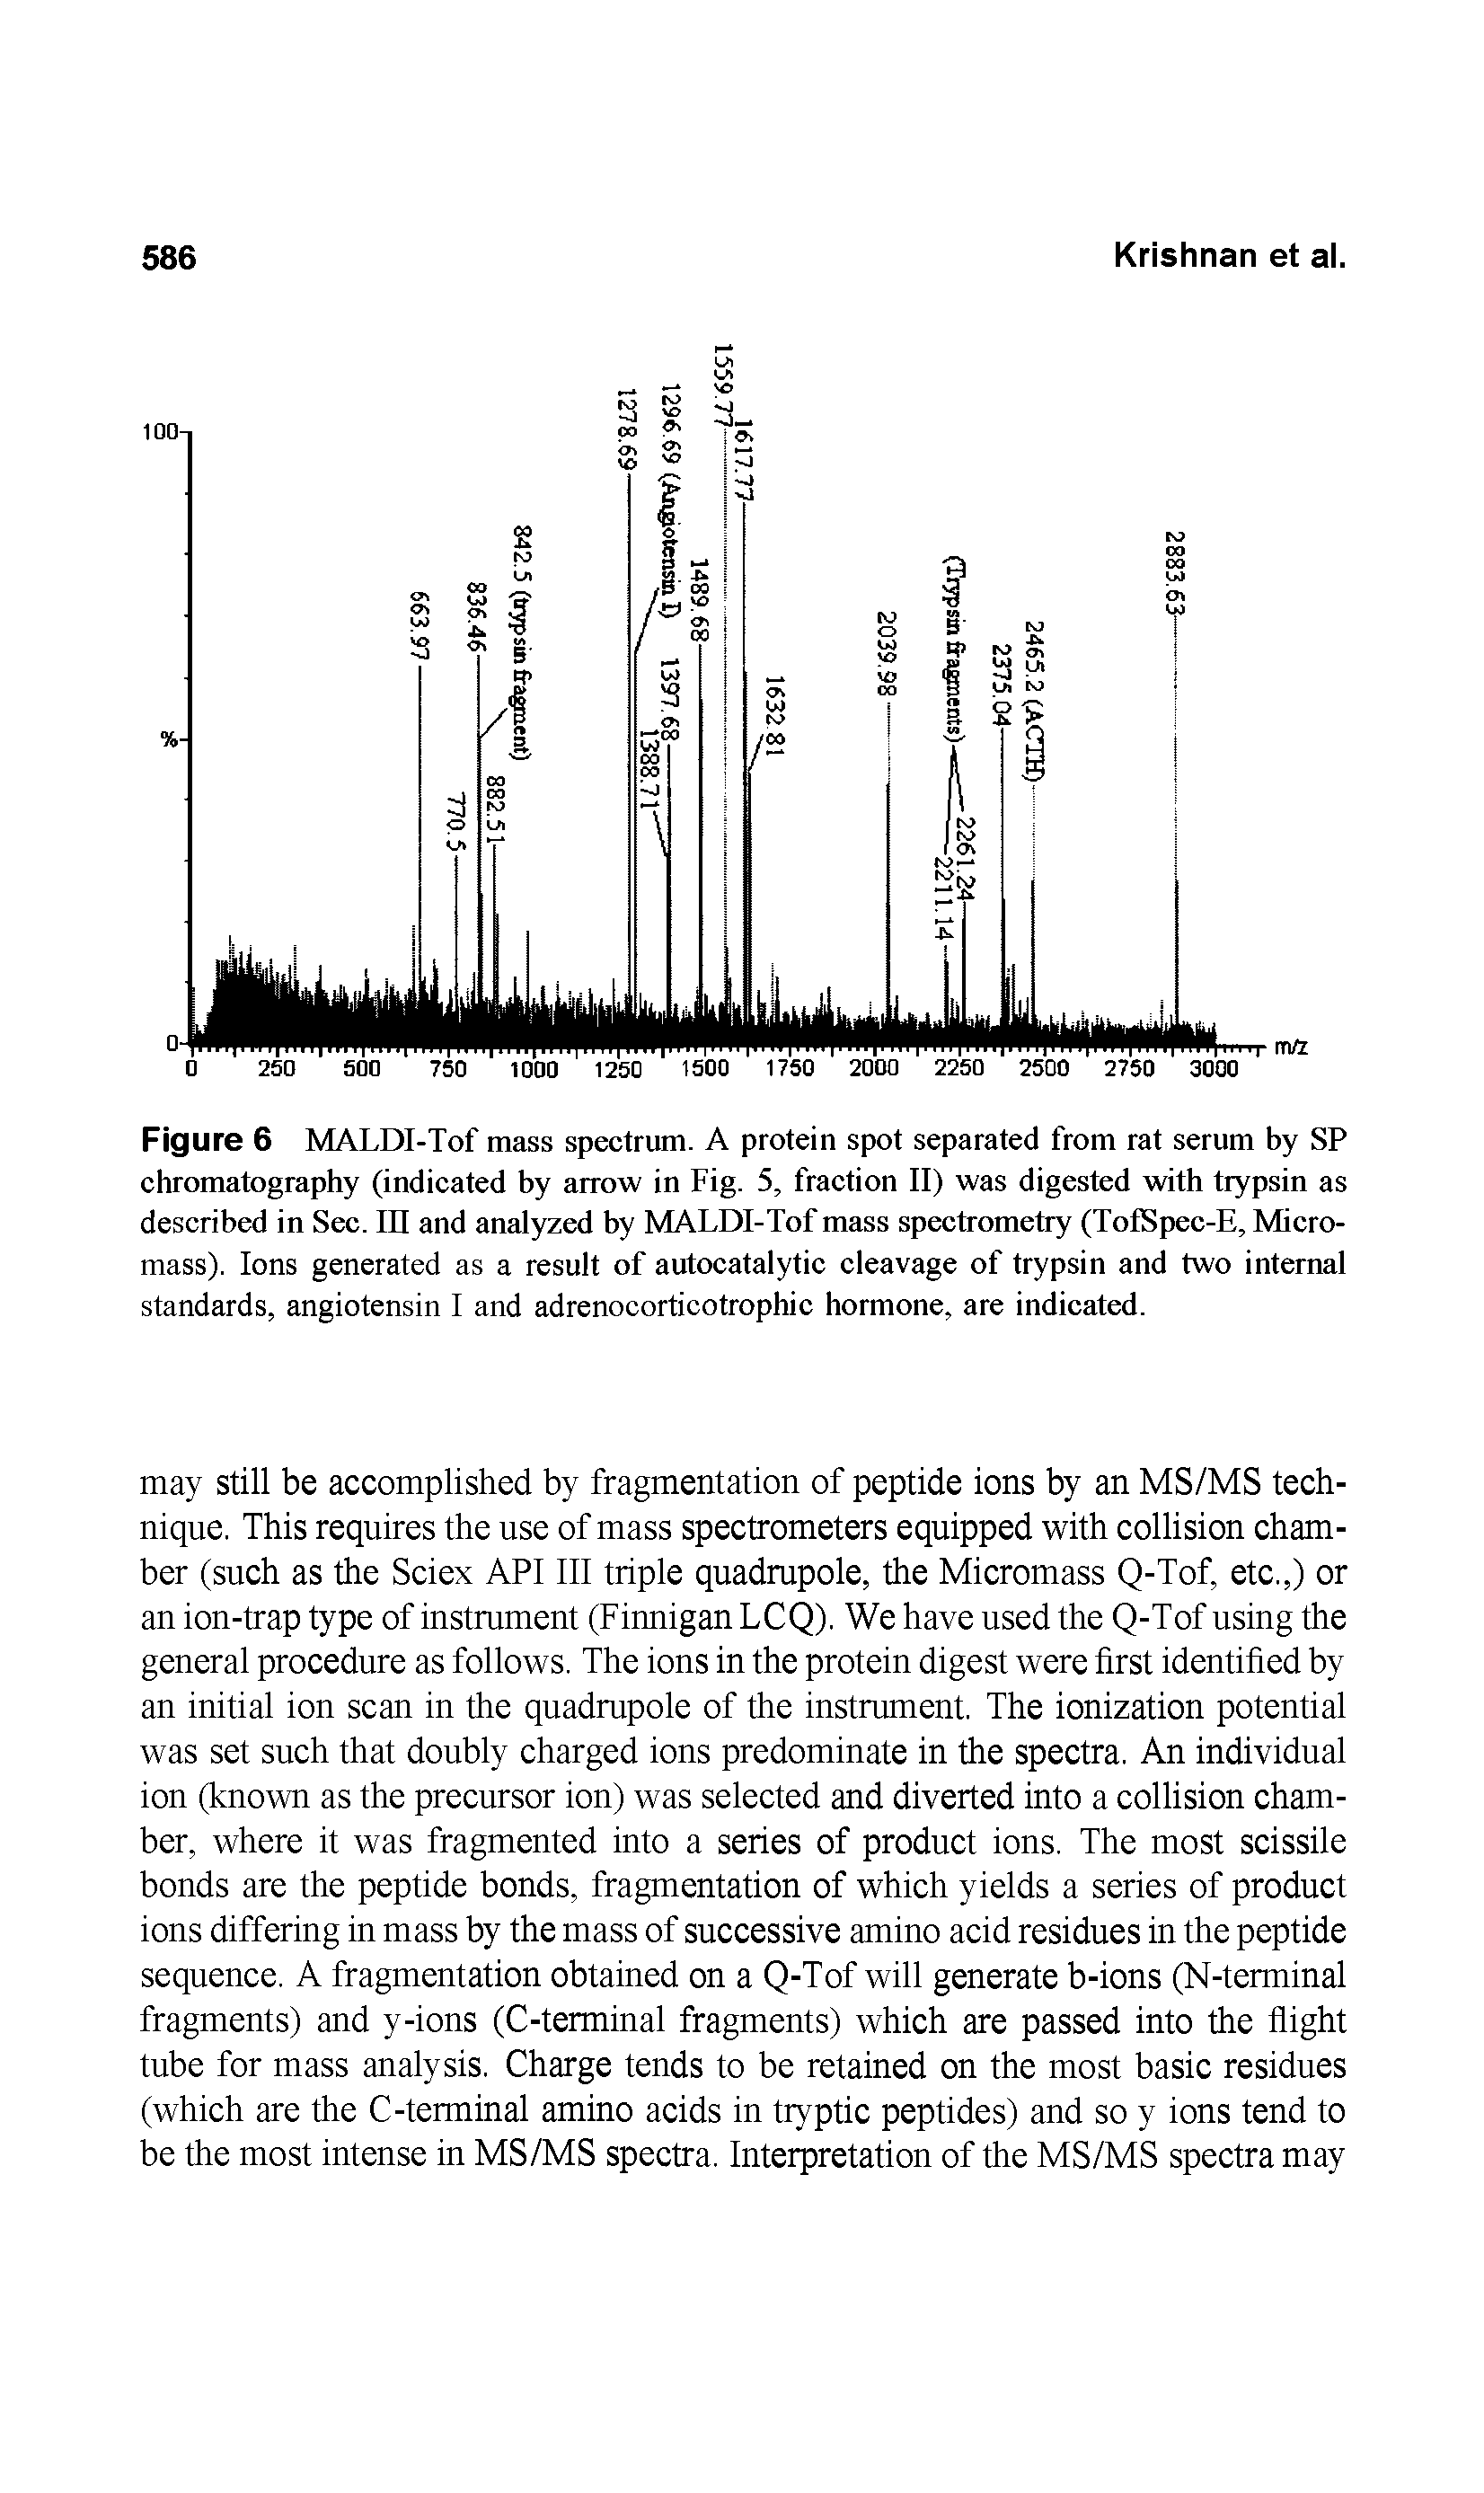 Figure 6 MALDI-Tof mass spectrum. A protein spot separated from rat serum by SP chromatography (indicated by arrow in Fig. 5, fraction II) was digested with trypsin as described in Sec. Ill and analyzed by MALDI-Tof mass spectrometry (TofSpec-E, Micromass). Ions generated as a result of autocatalytic cleavage of trypsin and two internal standards, angiotensin I and adrenocorticotrophic hormone, are indicated.